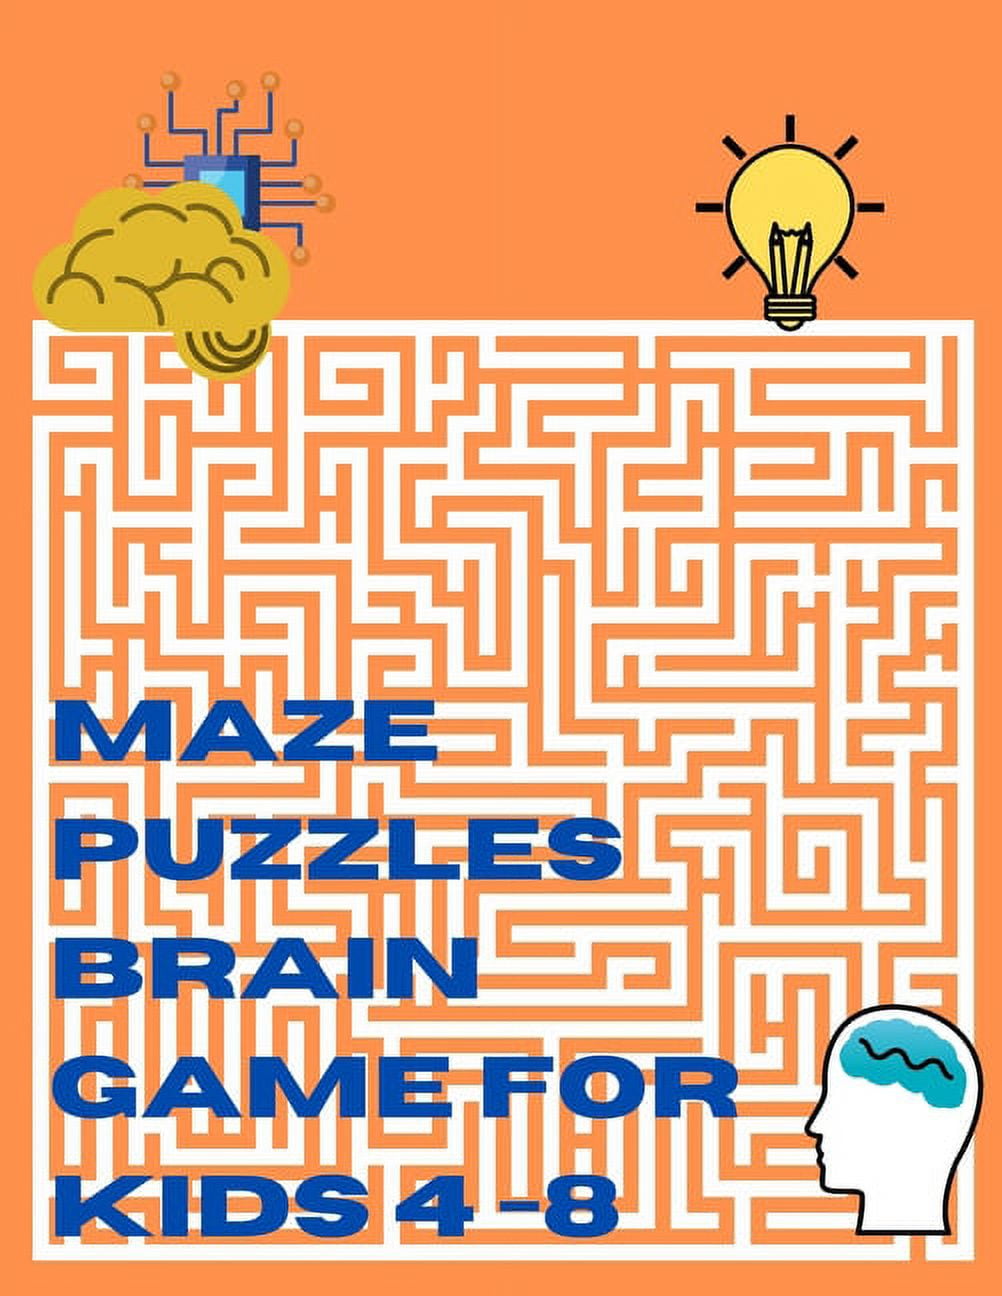 Mazes For Kids Ages 4-12: Maze Activity Book for kids ages 4-6, 6-8 & 8-12  Activity Workbook for Games, Puzzles, Problem-Solving and more (Paperback)